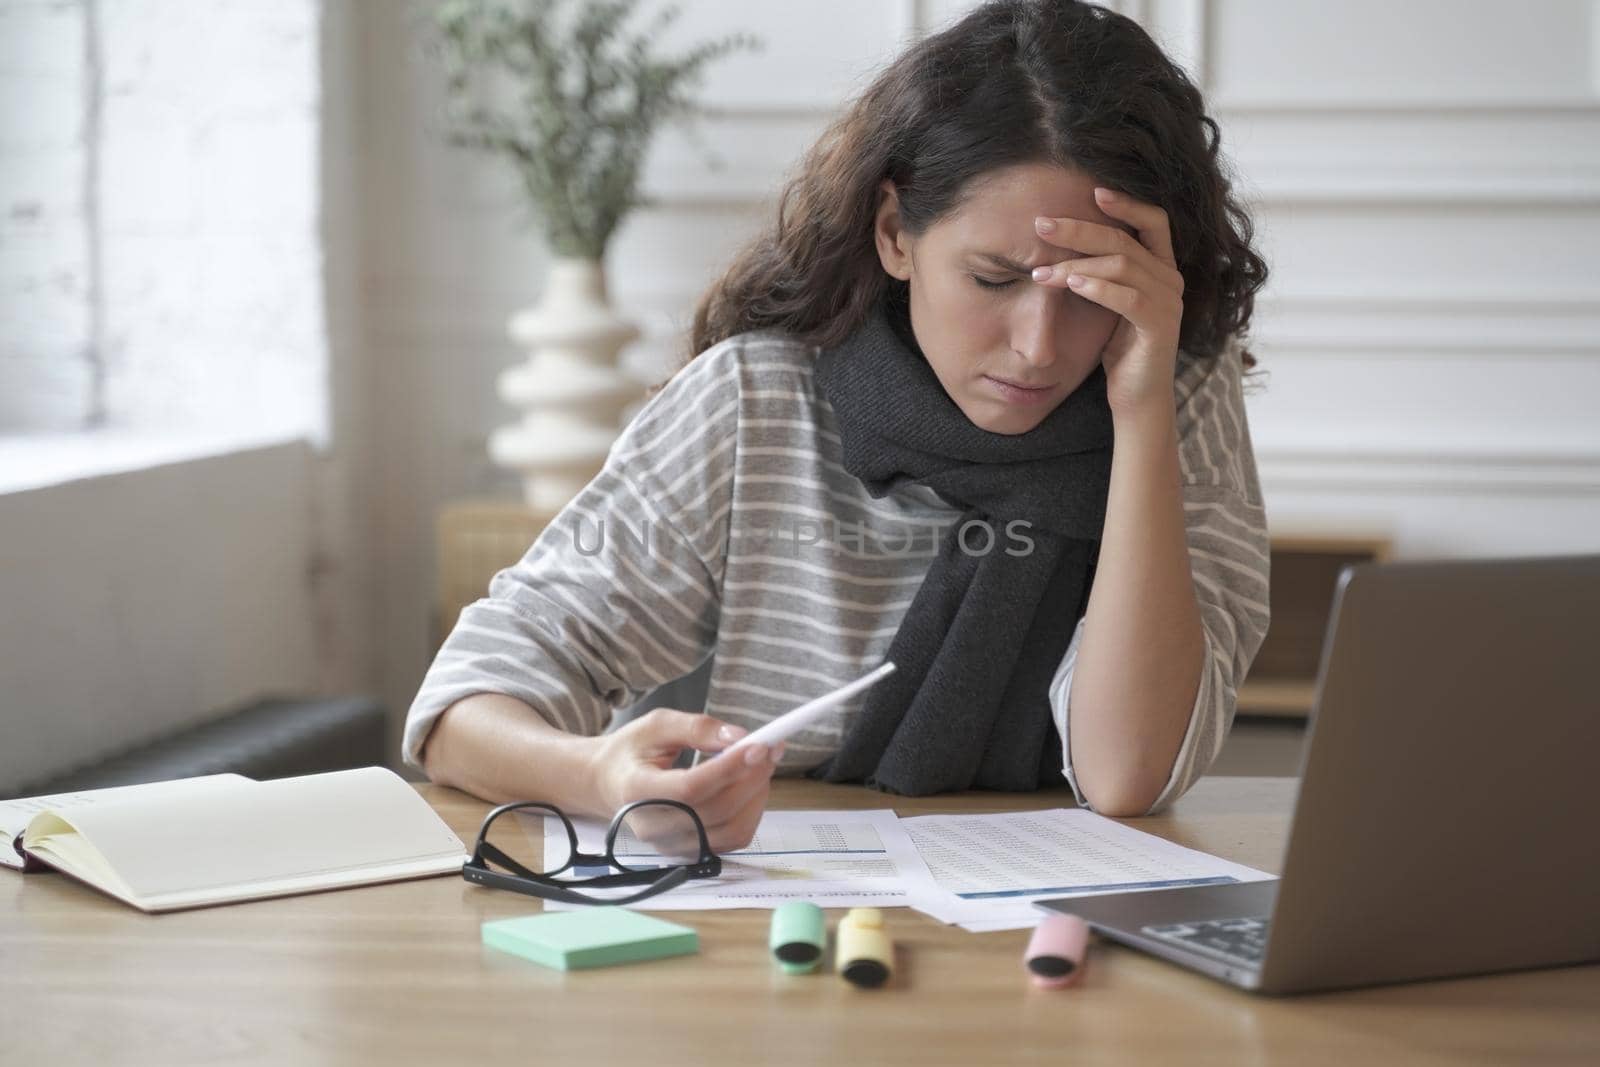 Young latin woman office worker sitting at table with digital thermometer in hand, suffering from headache and high fever at work, female emloyee feeling unwell sick, measuring temerature at workplace